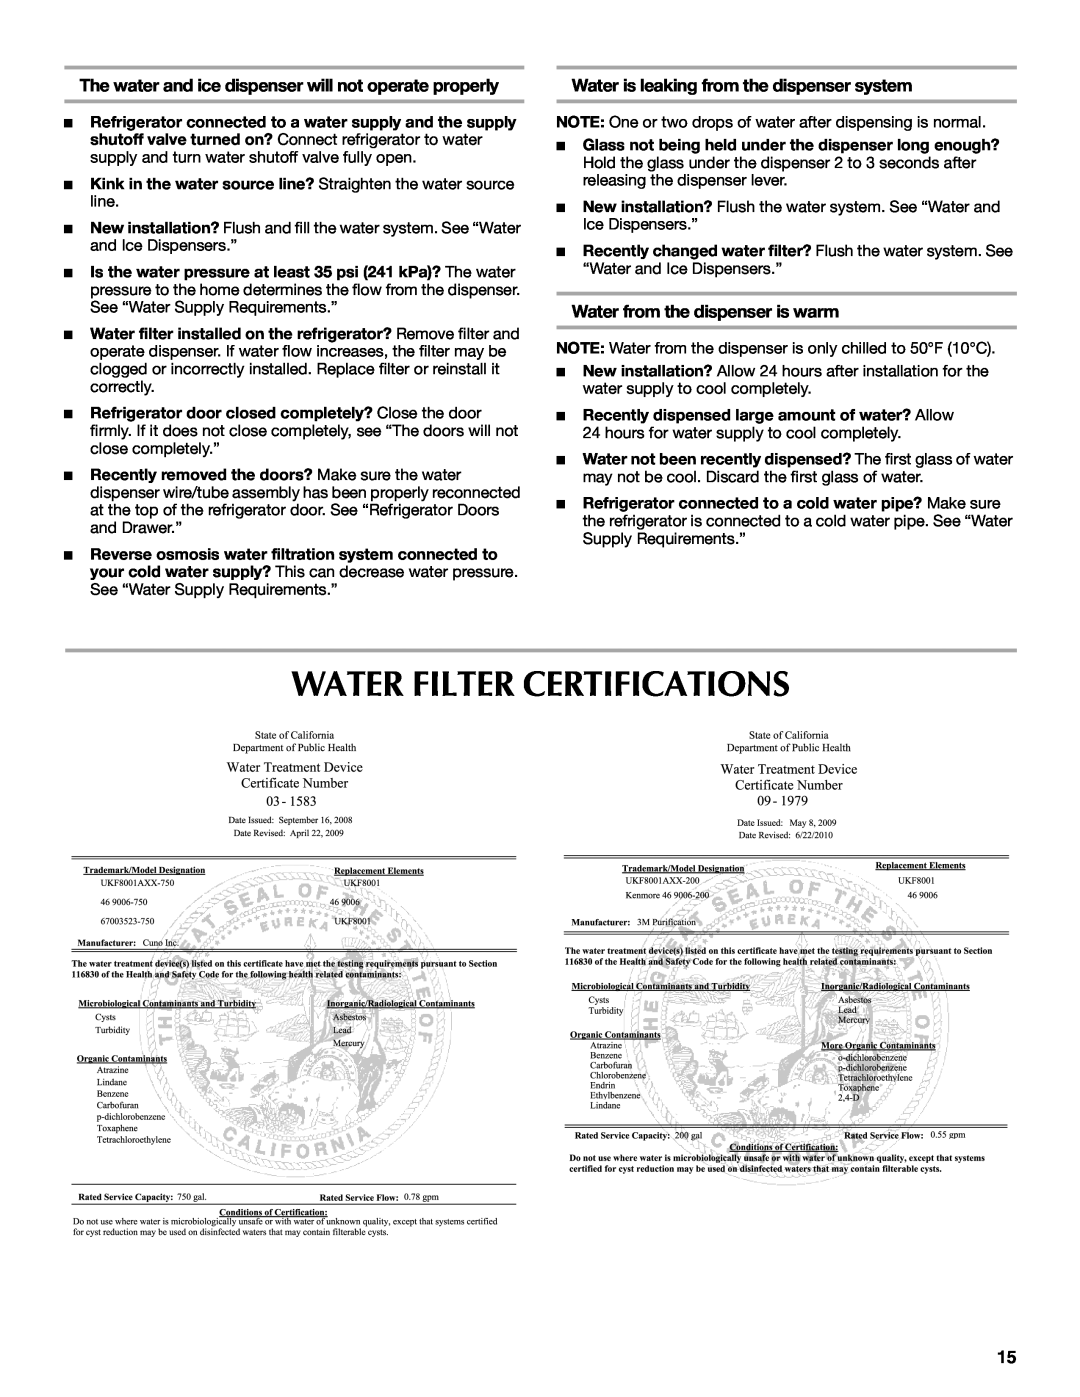 Maytag MFI2269VEM Water Filter Certifications, The water and ice dispenser will not operate properly 